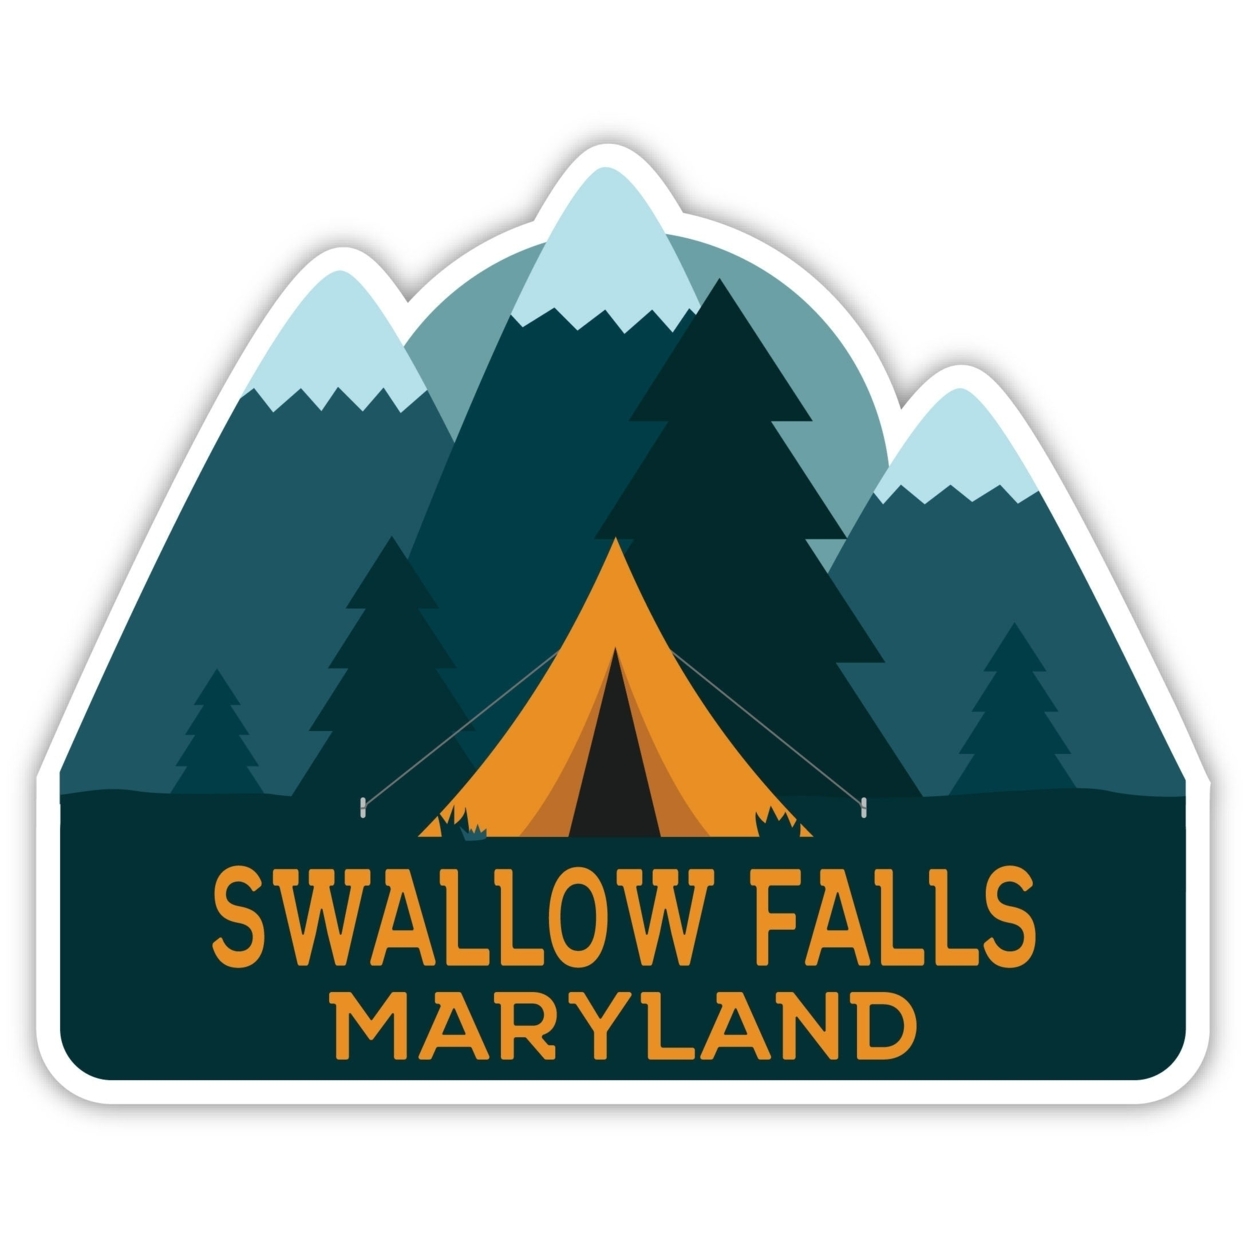 Swallow Falls Maryland Souvenir Decorative Stickers (Choose Theme And Size) - Single Unit, 4-Inch, Tent